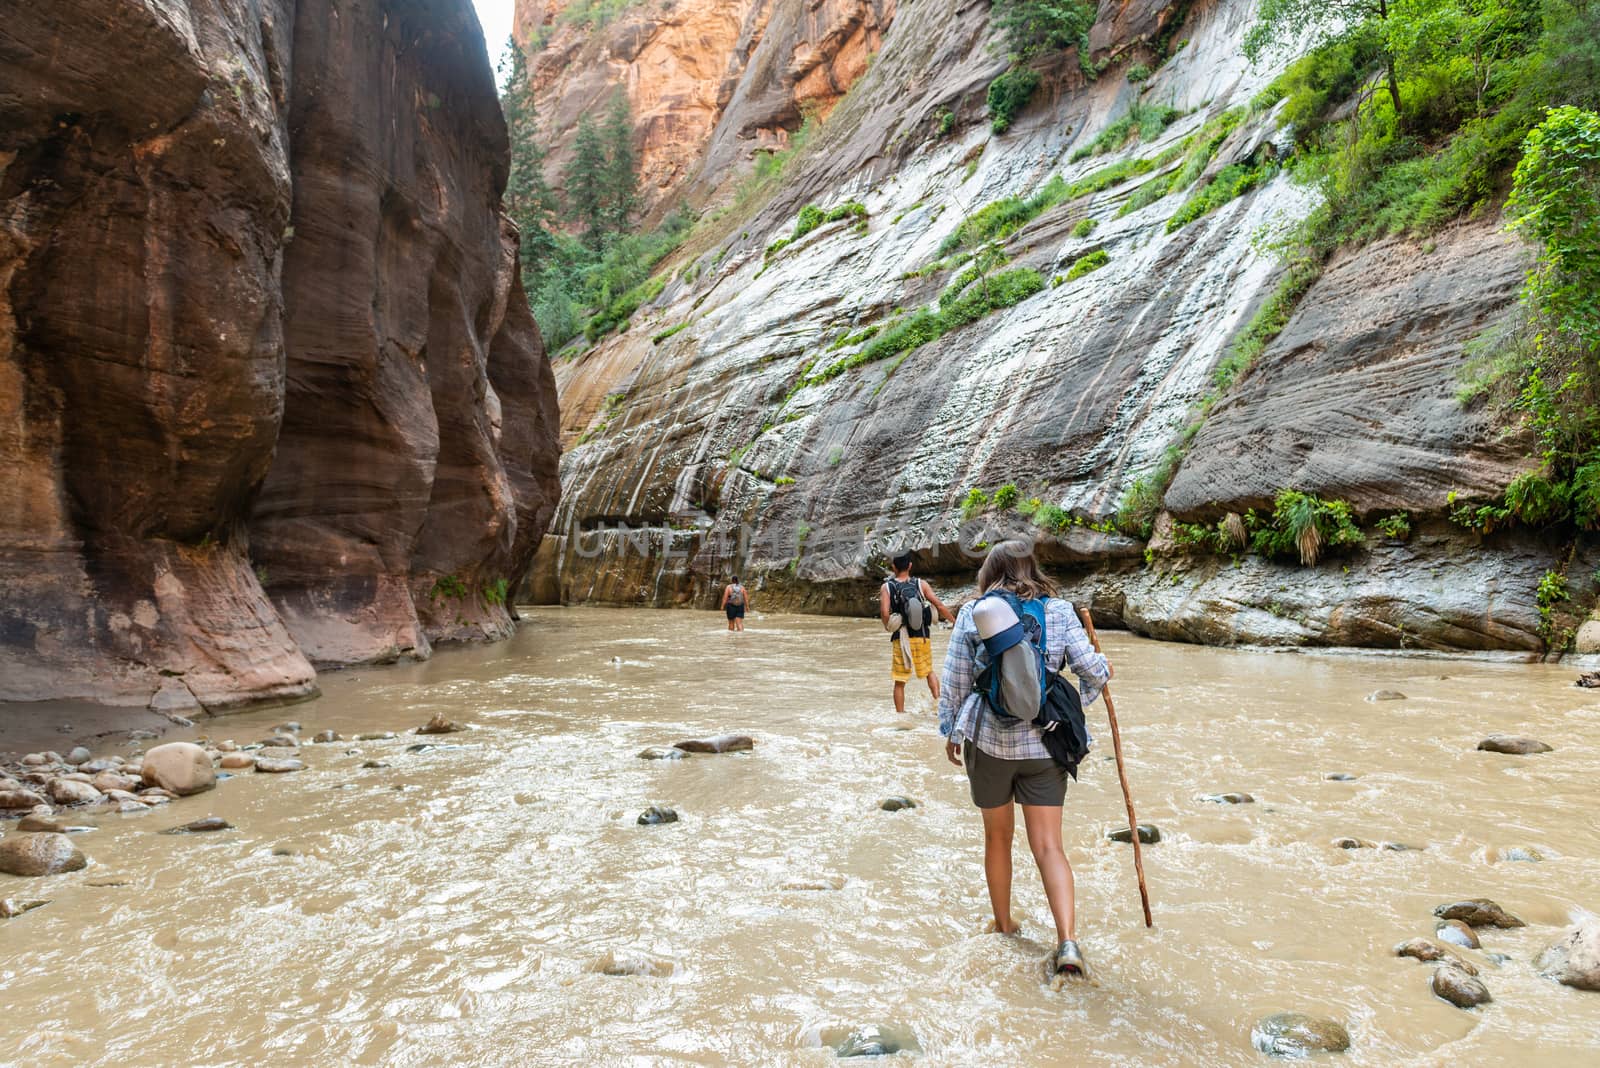 Hikers in the Narrows in Zion National Park, Utah